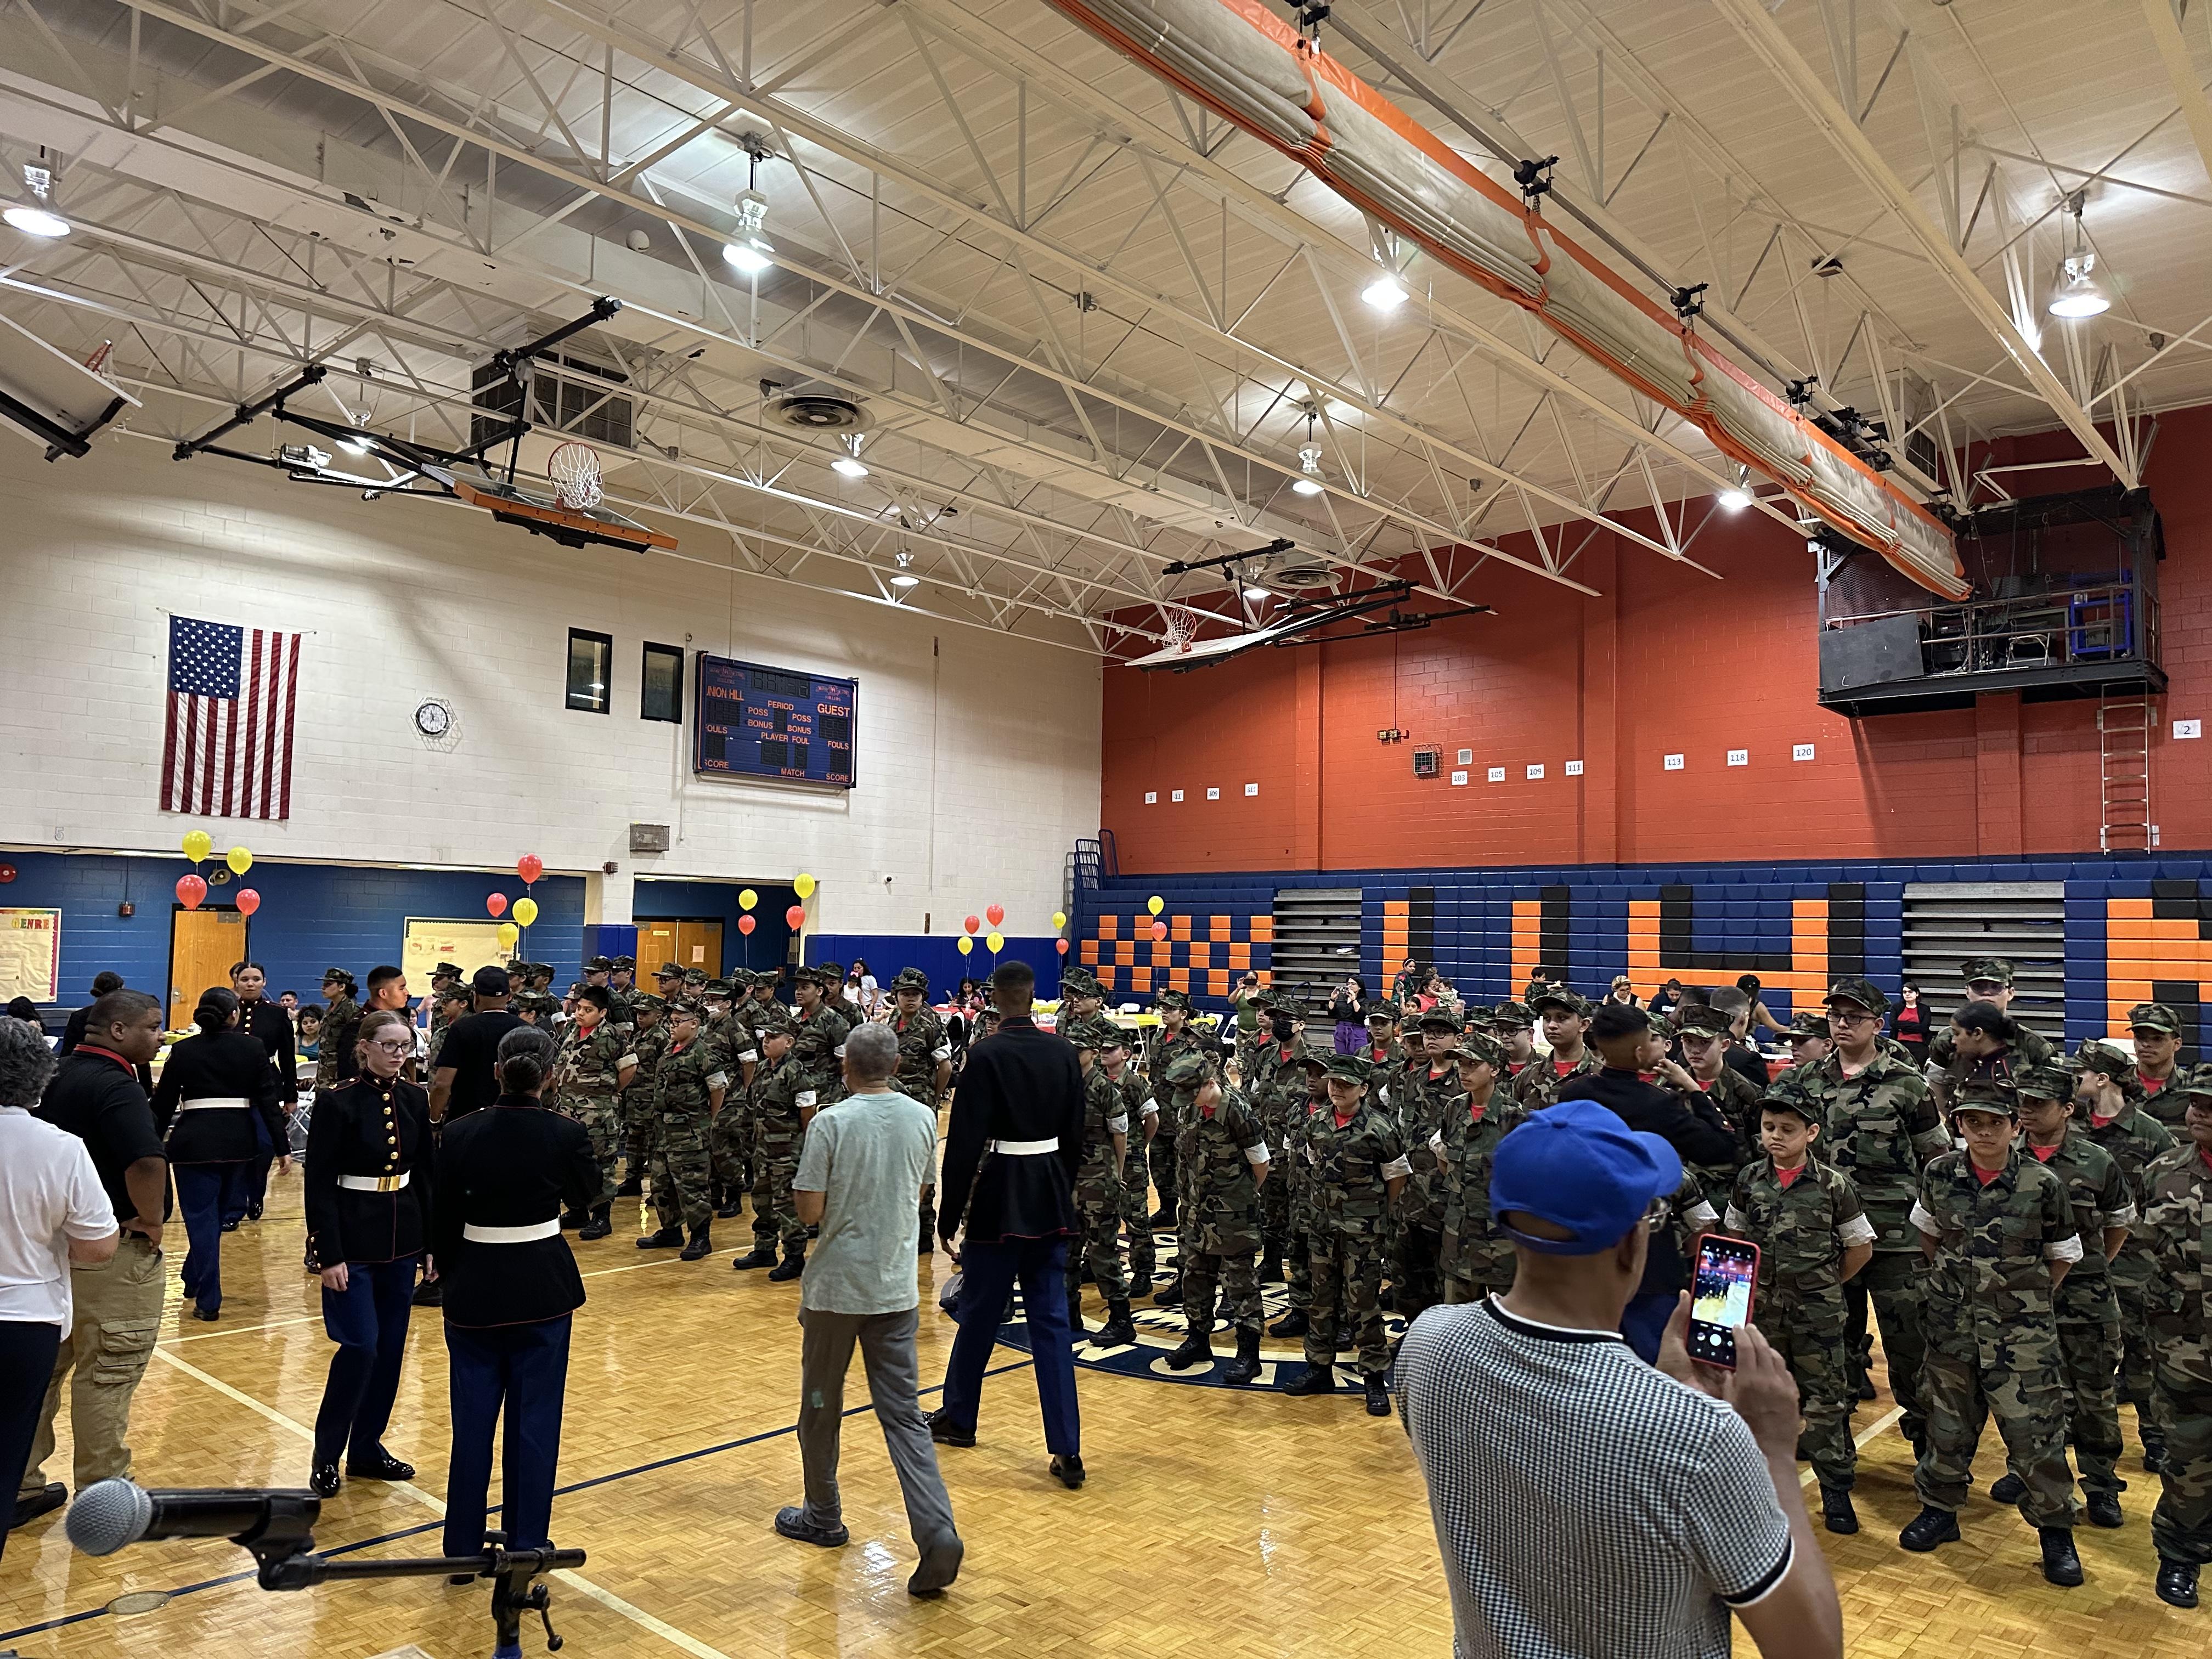 The Union City Young Marines Ceremony at the Union Hill Middle School